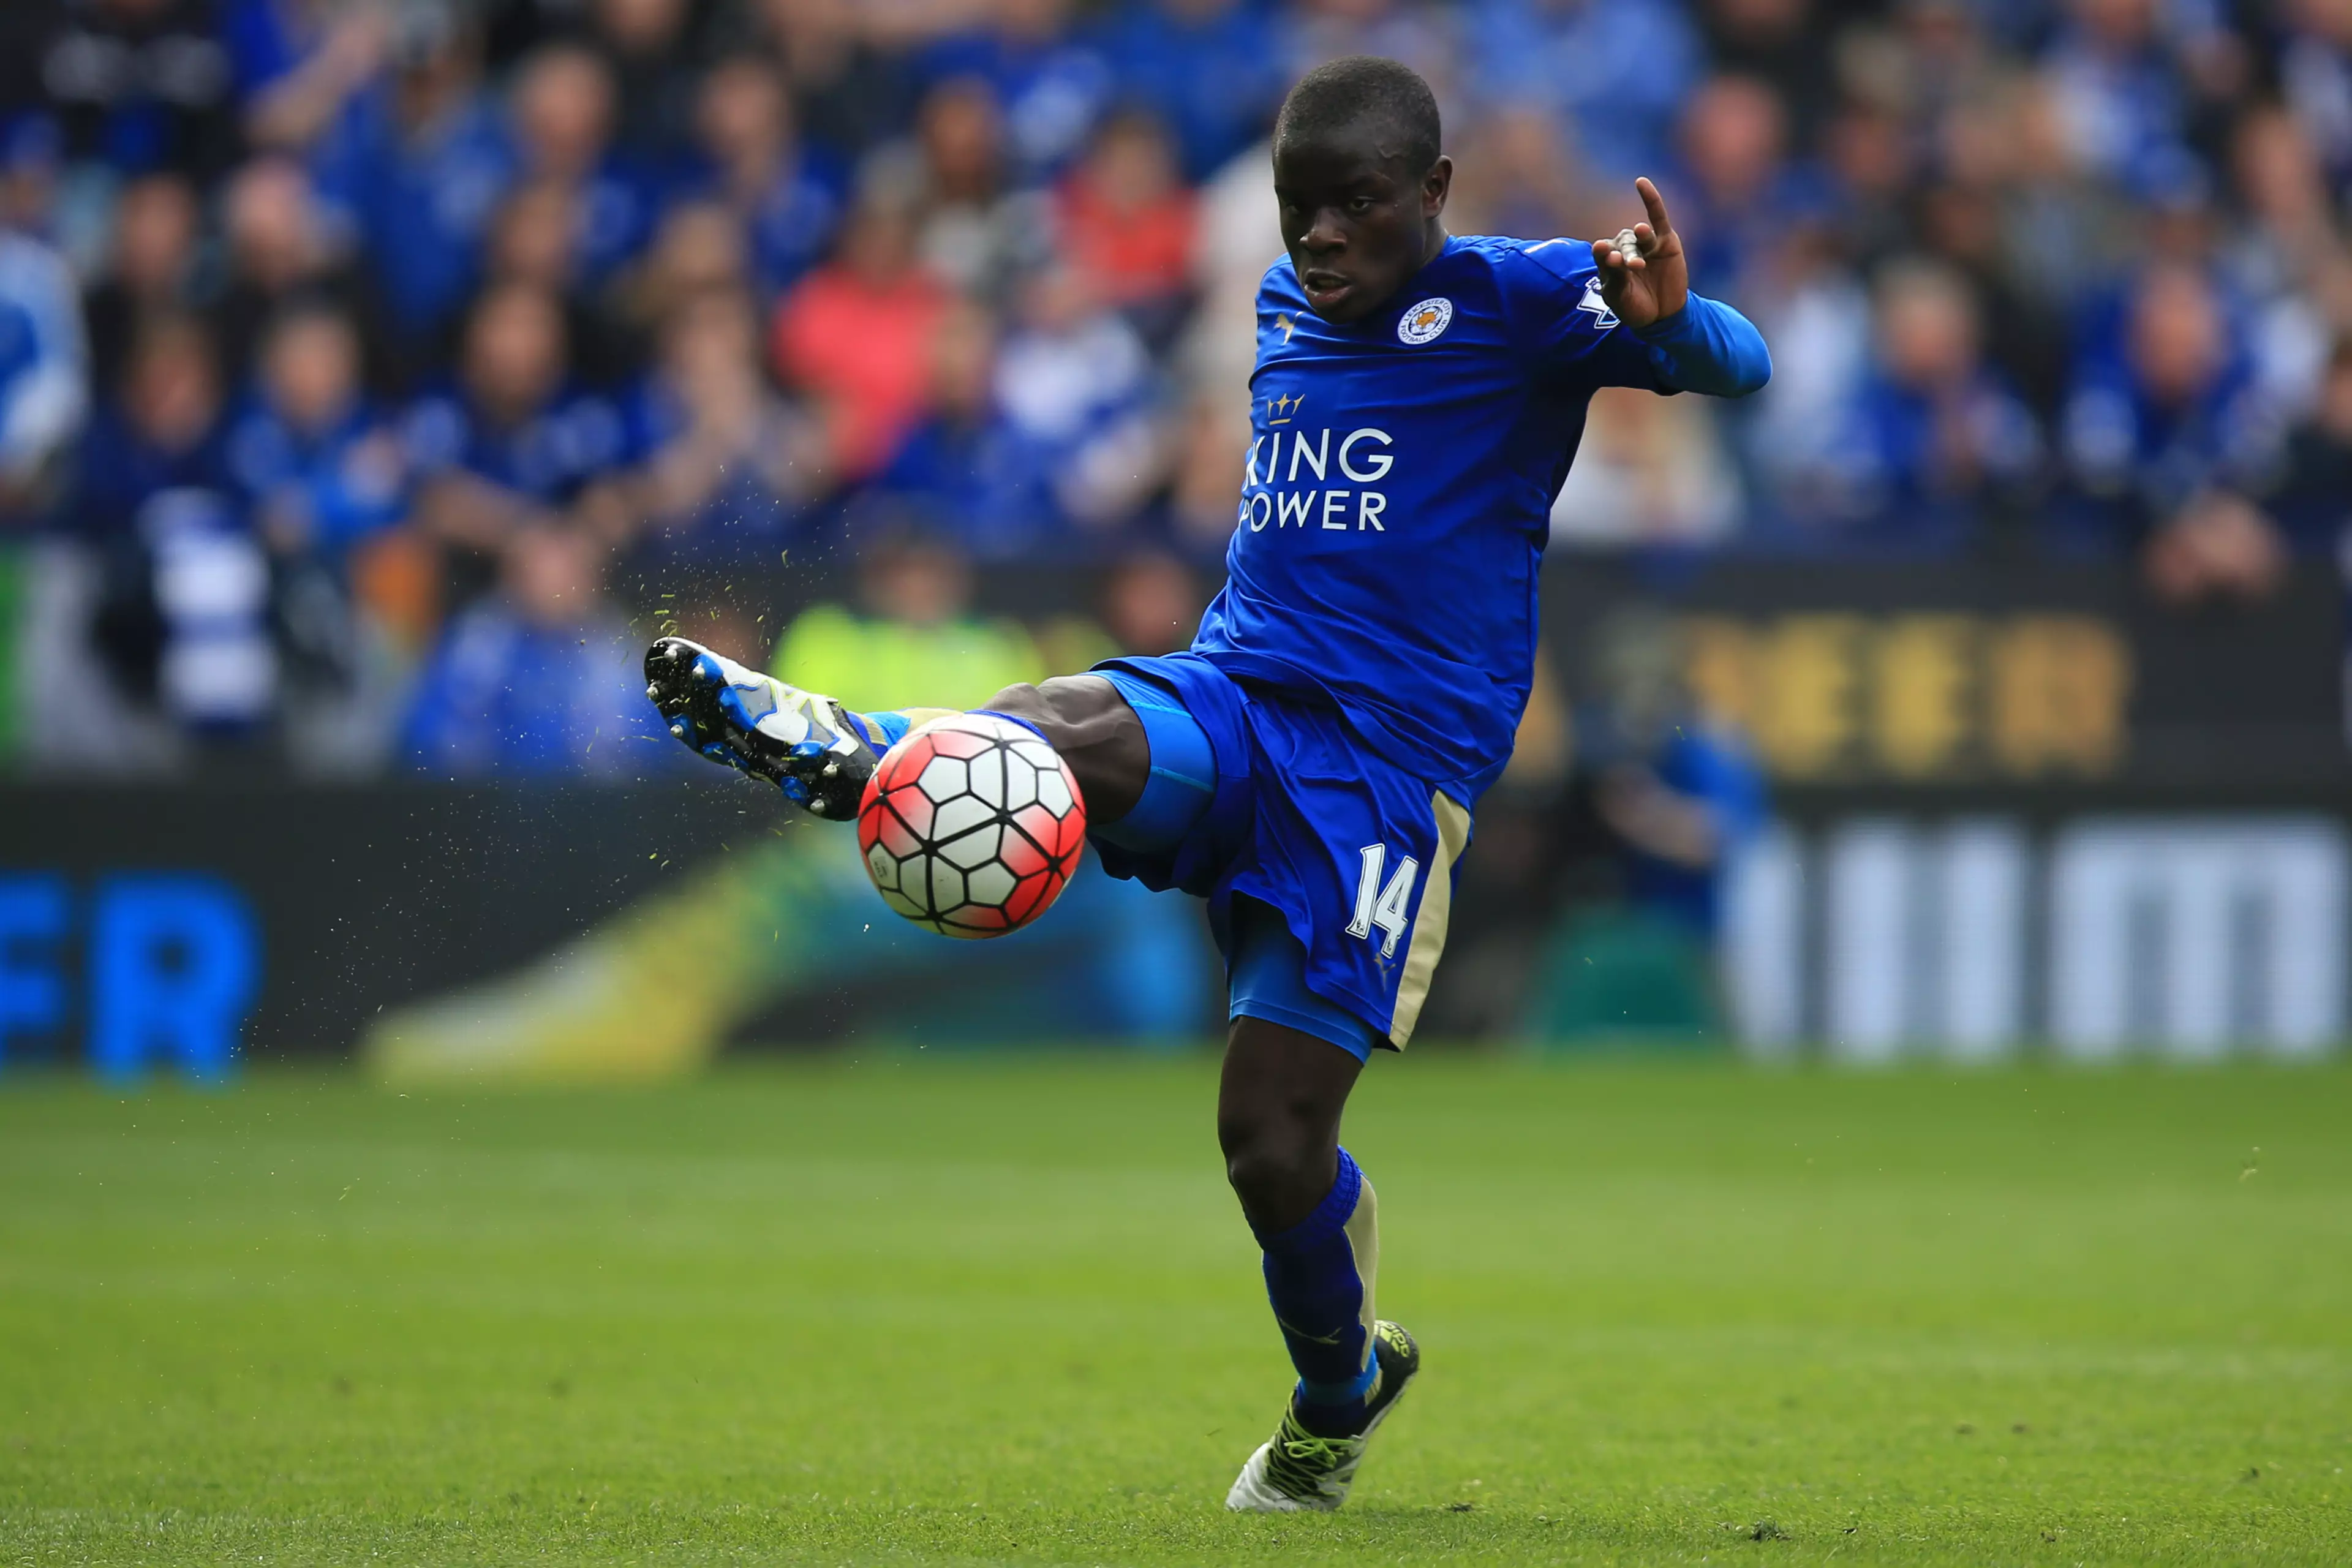 N'Golo Kante was an absolute steal for Leicester from Caen in 2015